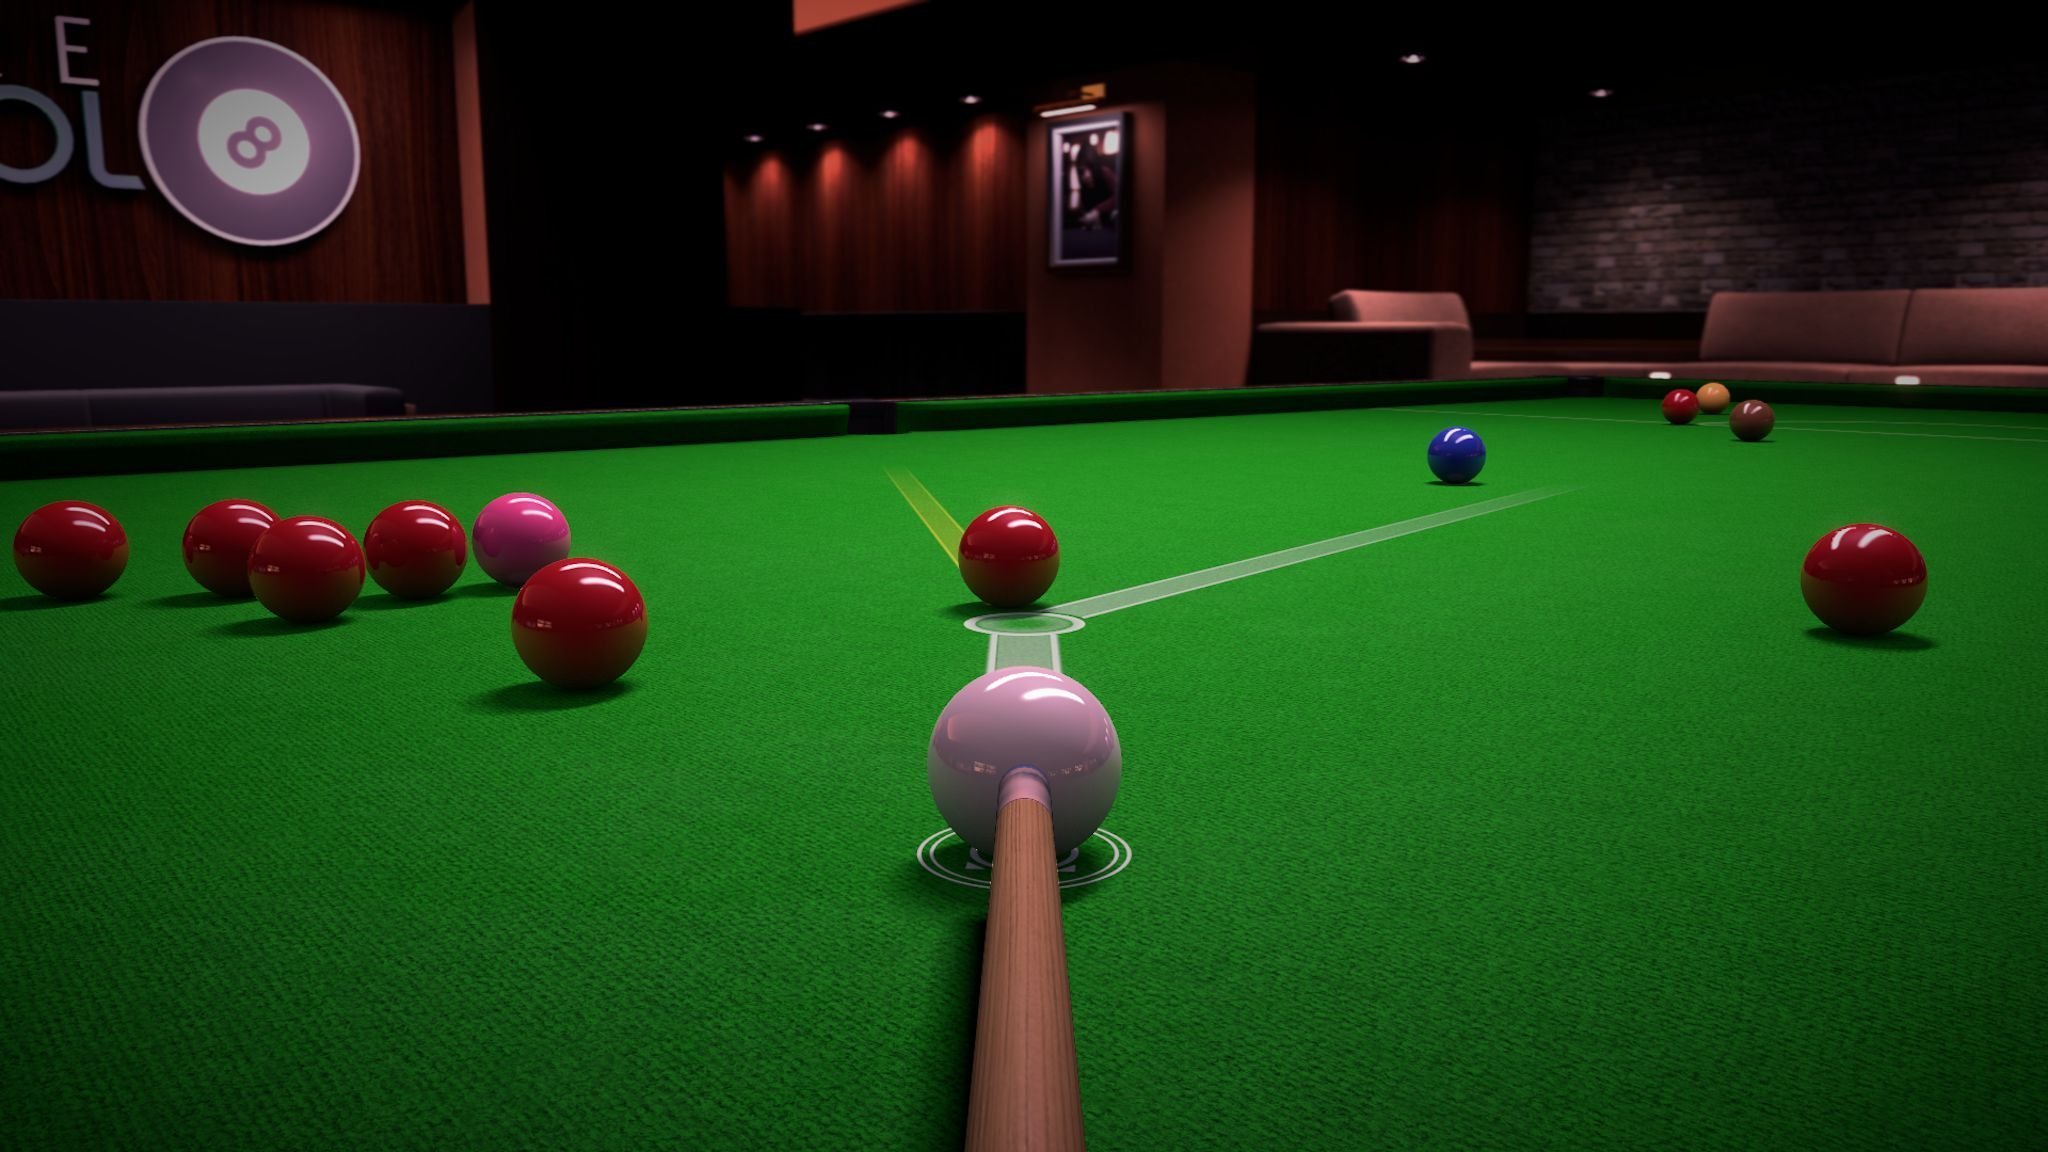 Pure Pool - SINUCA GAMEPLAY - XBOX ONE 